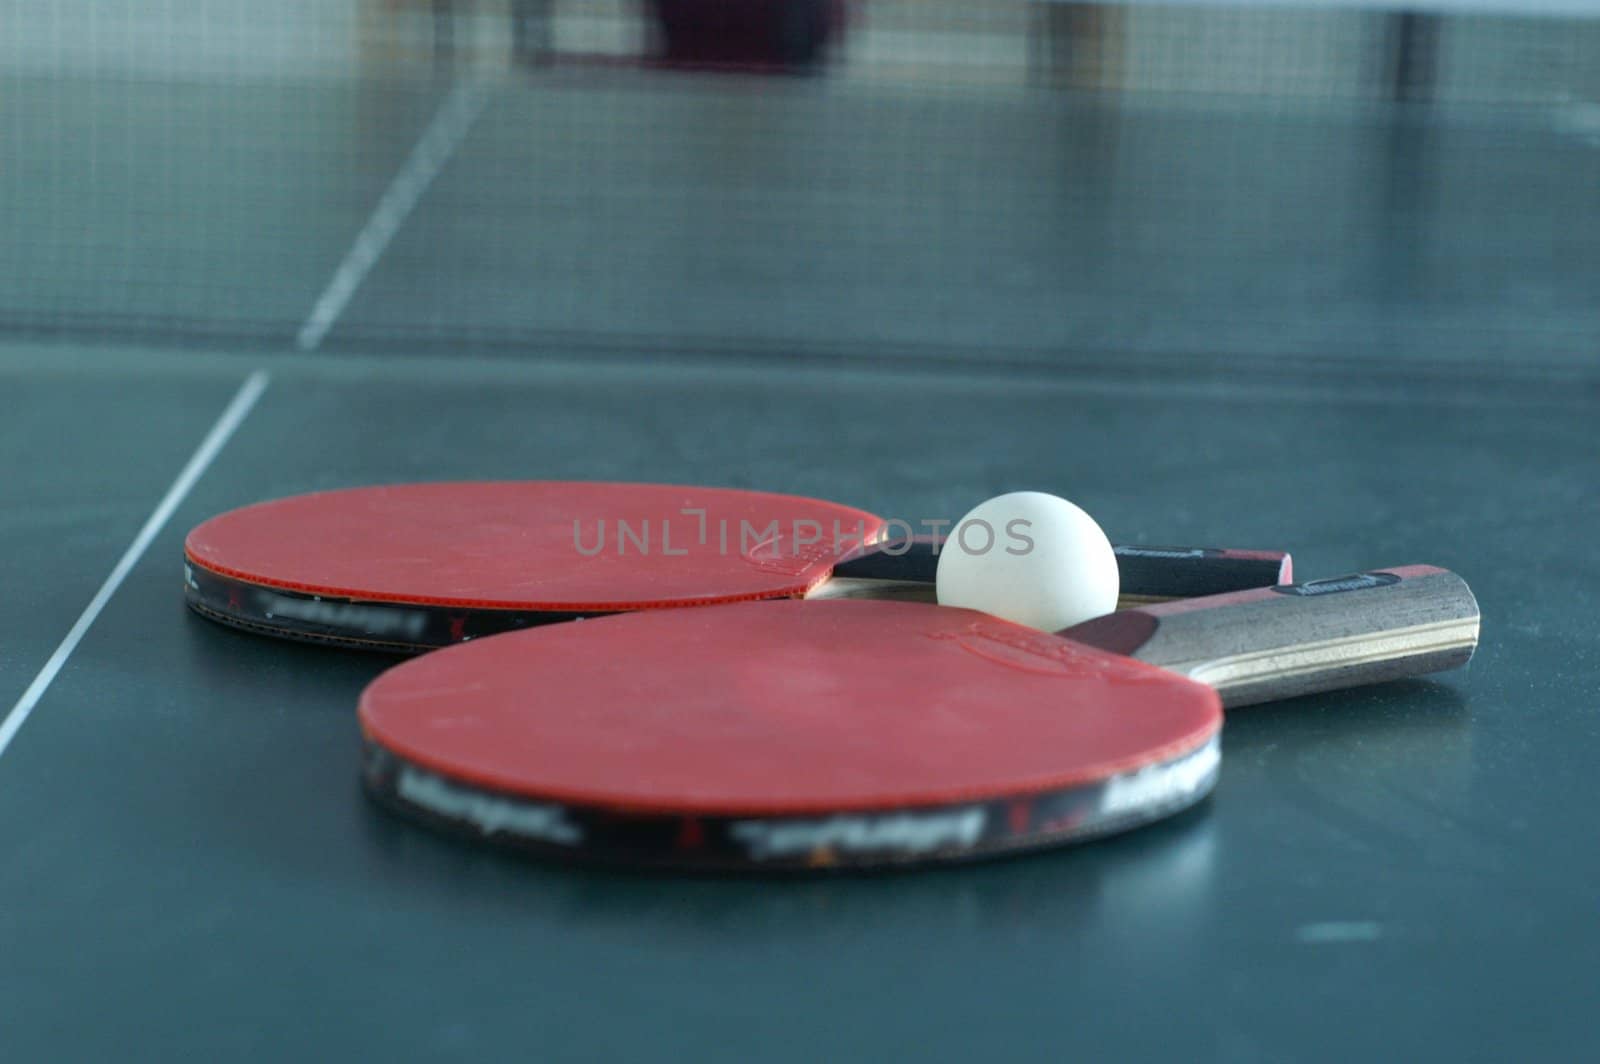 ping pong rackets on a table